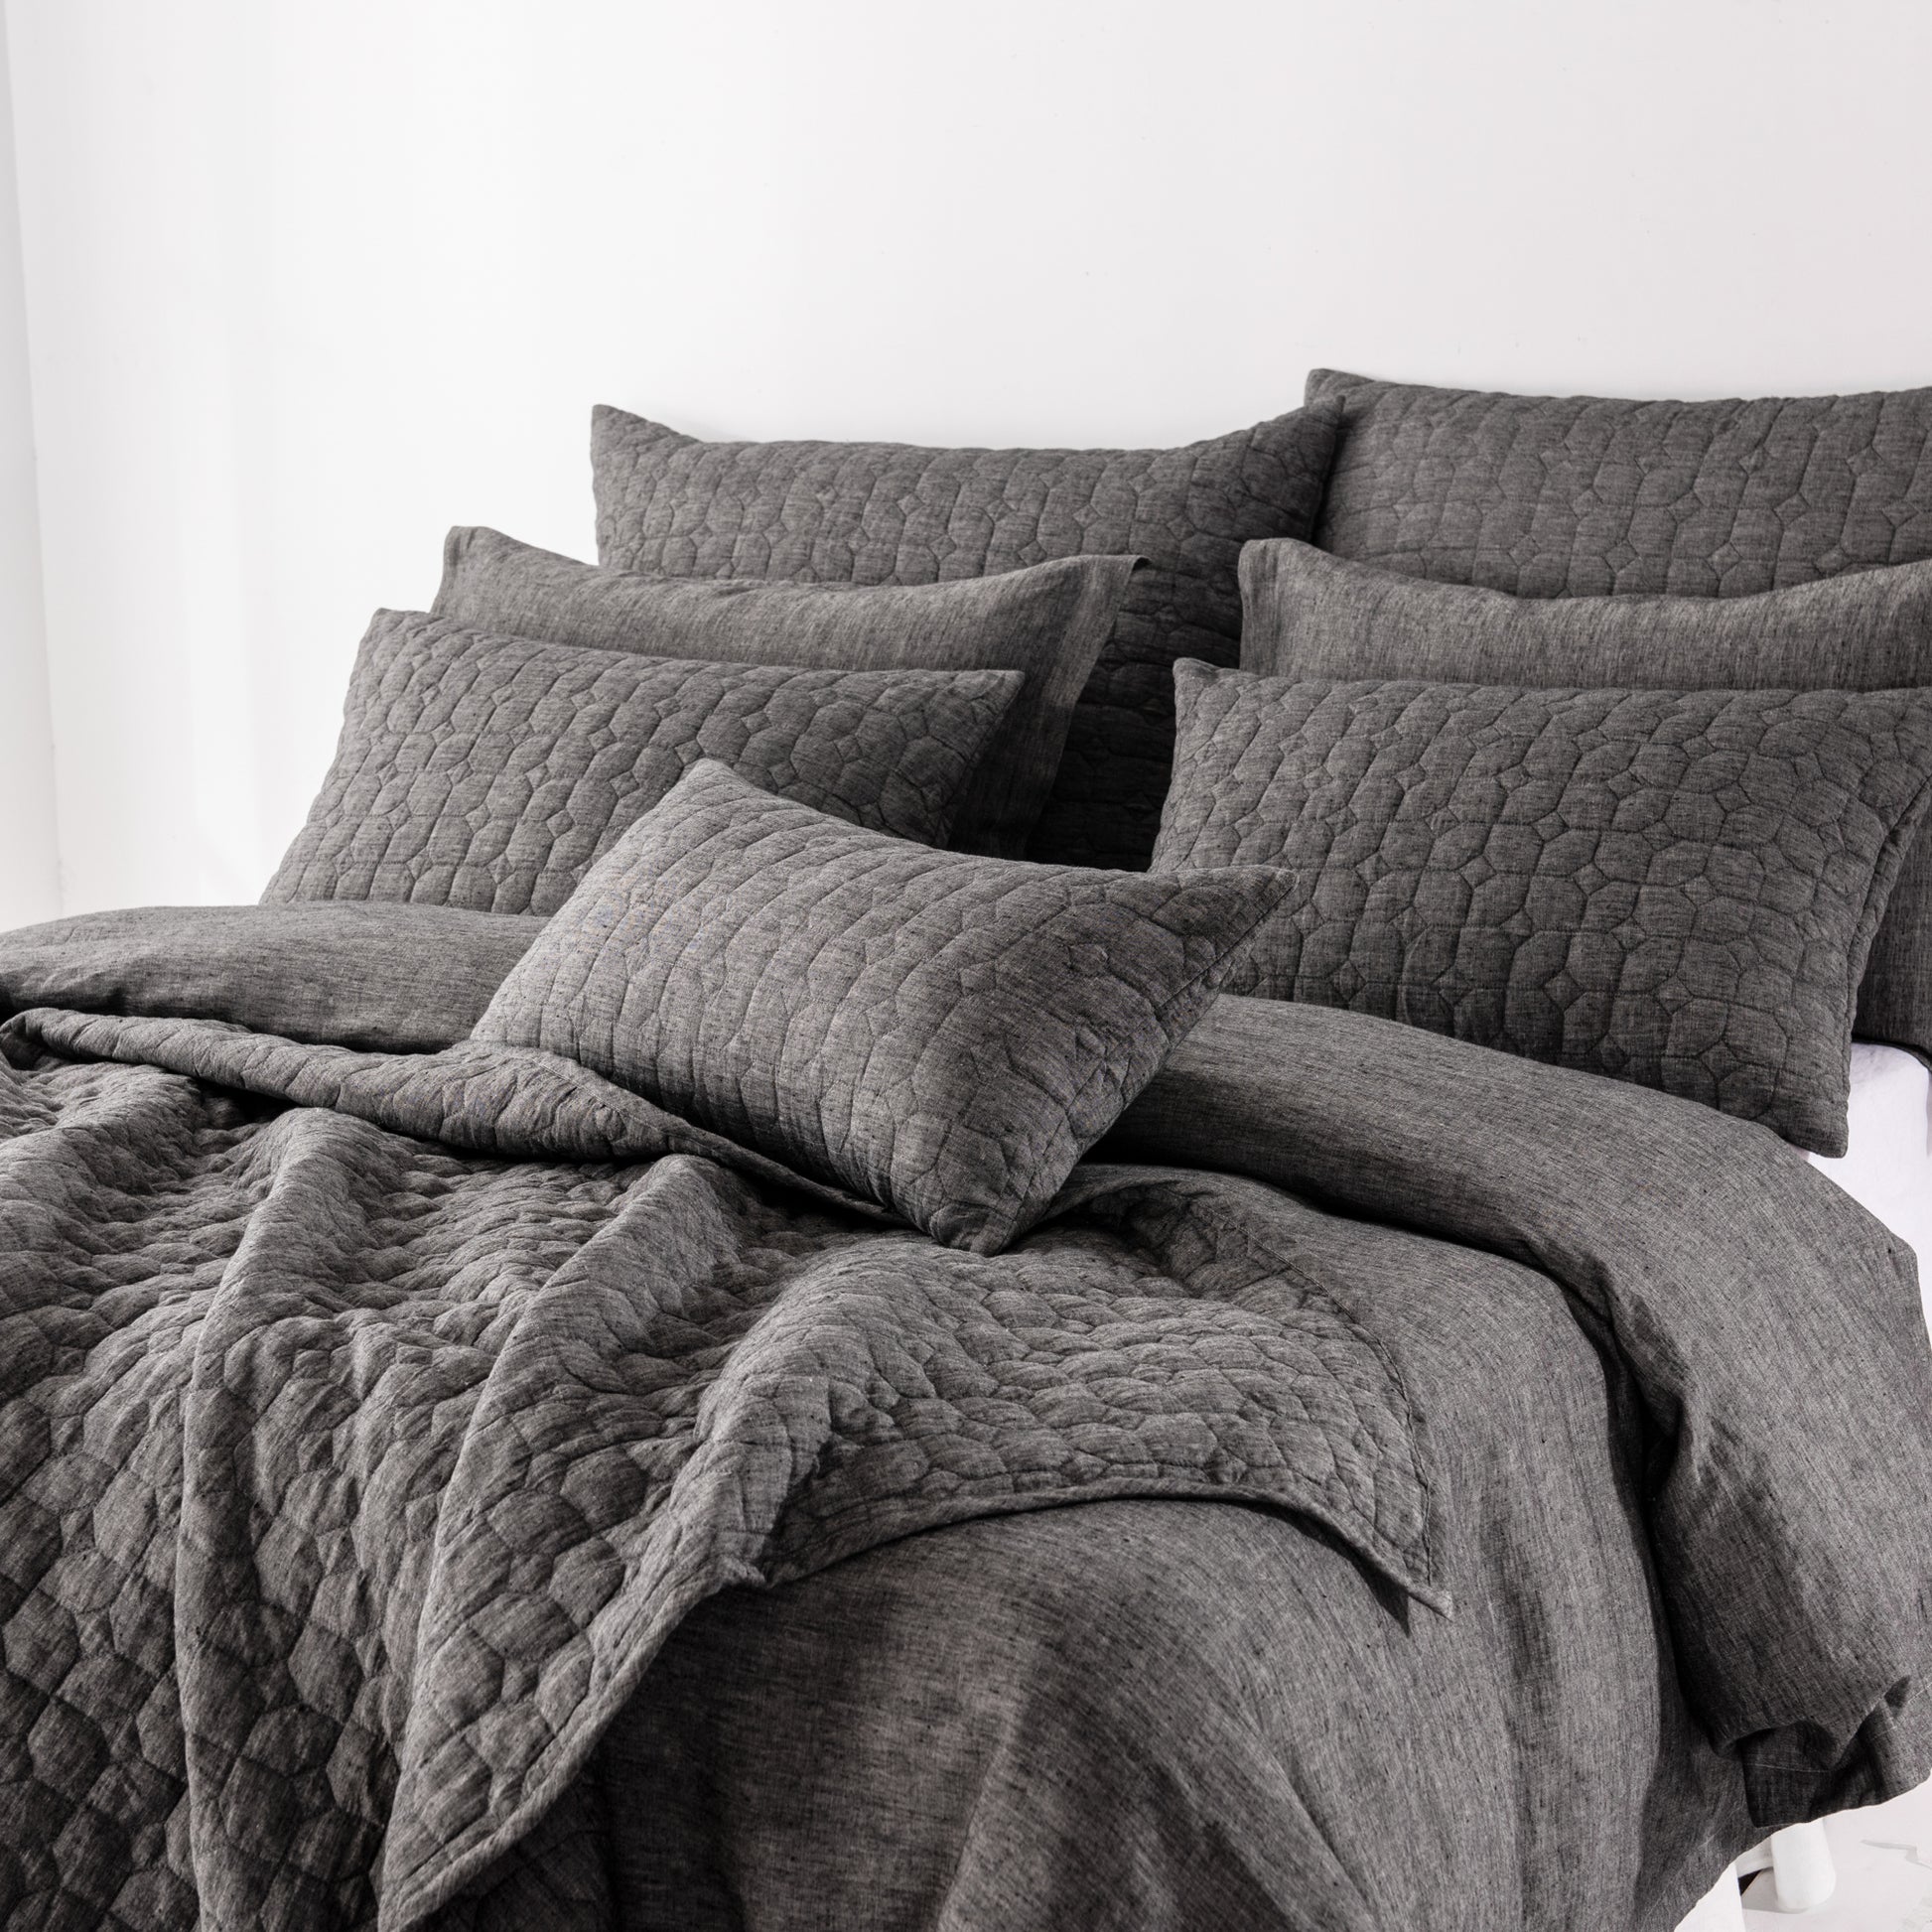 Shop Duvet Cover and Shams online at home decor stores near you